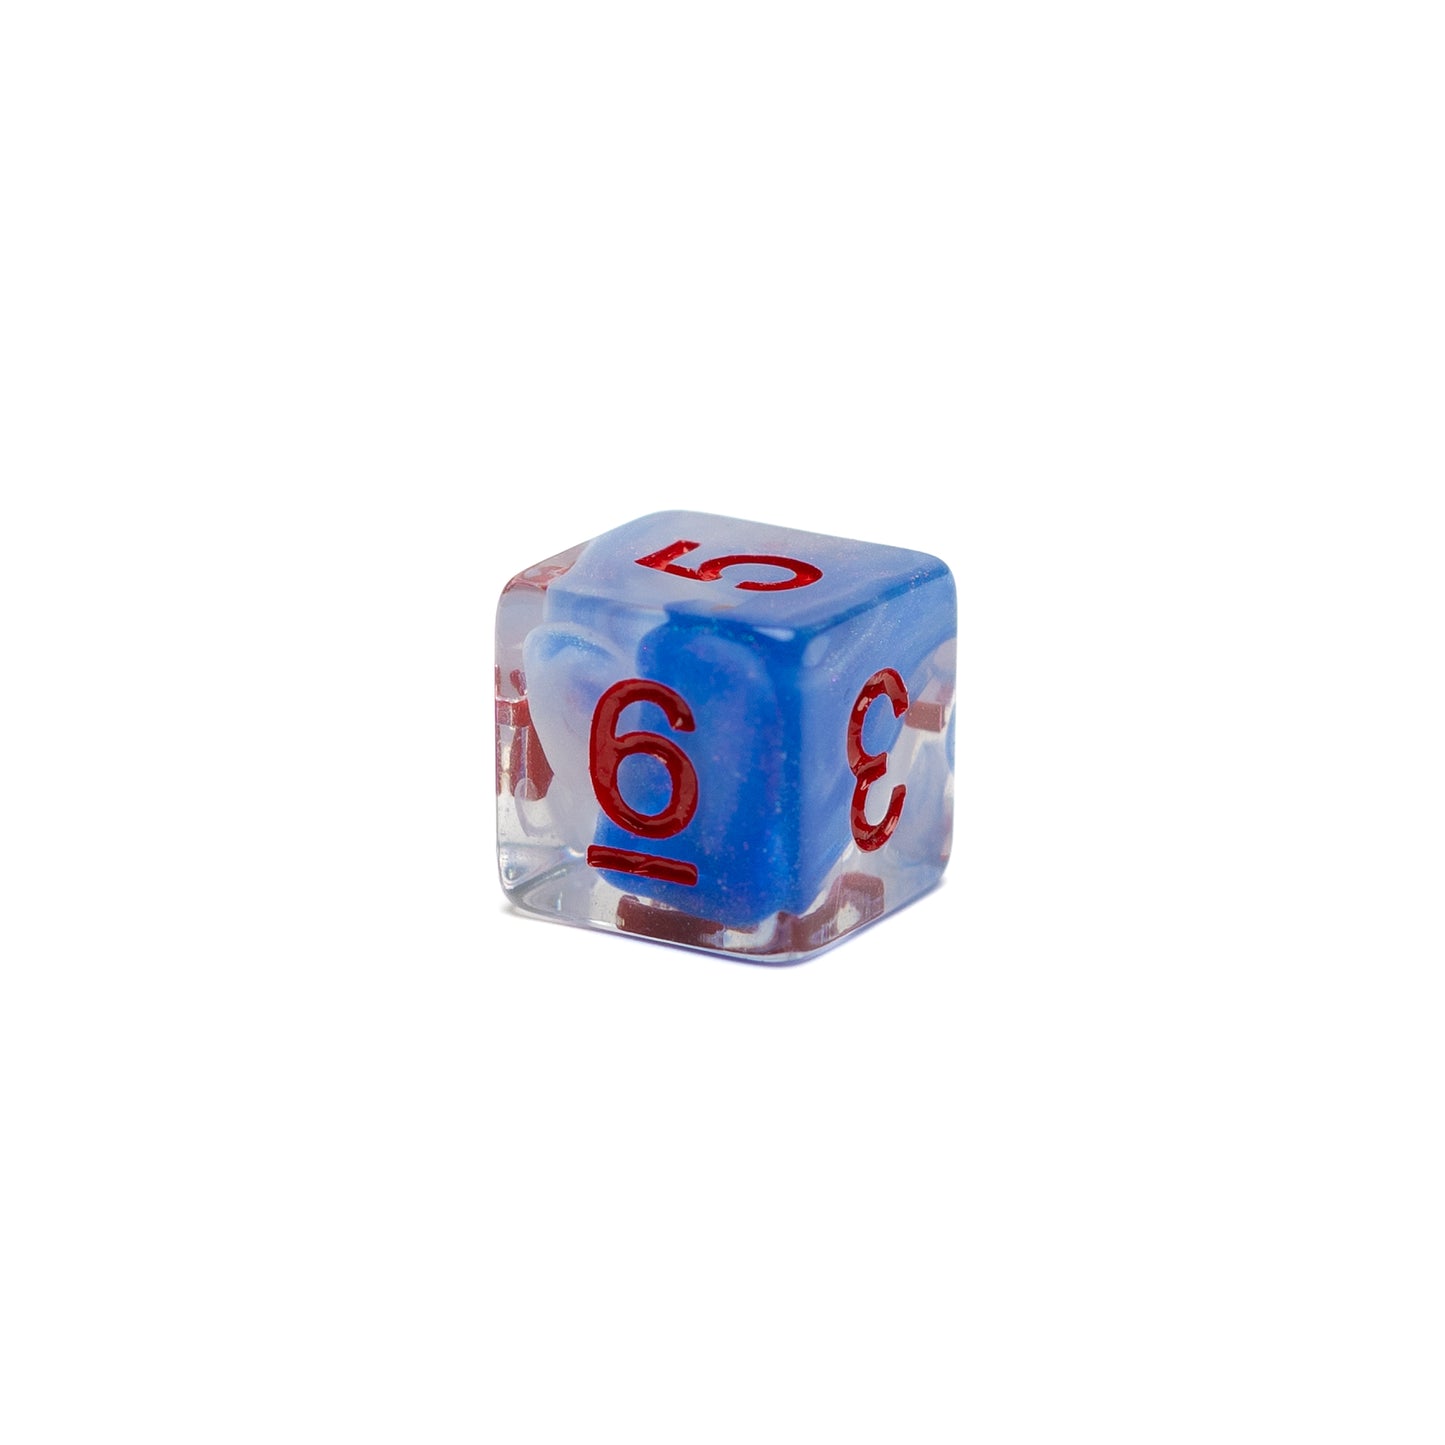 Roll Britannia Acrylic Dungeons and Dragons D6 Dice with Red and Blue Ocean Aesthetic